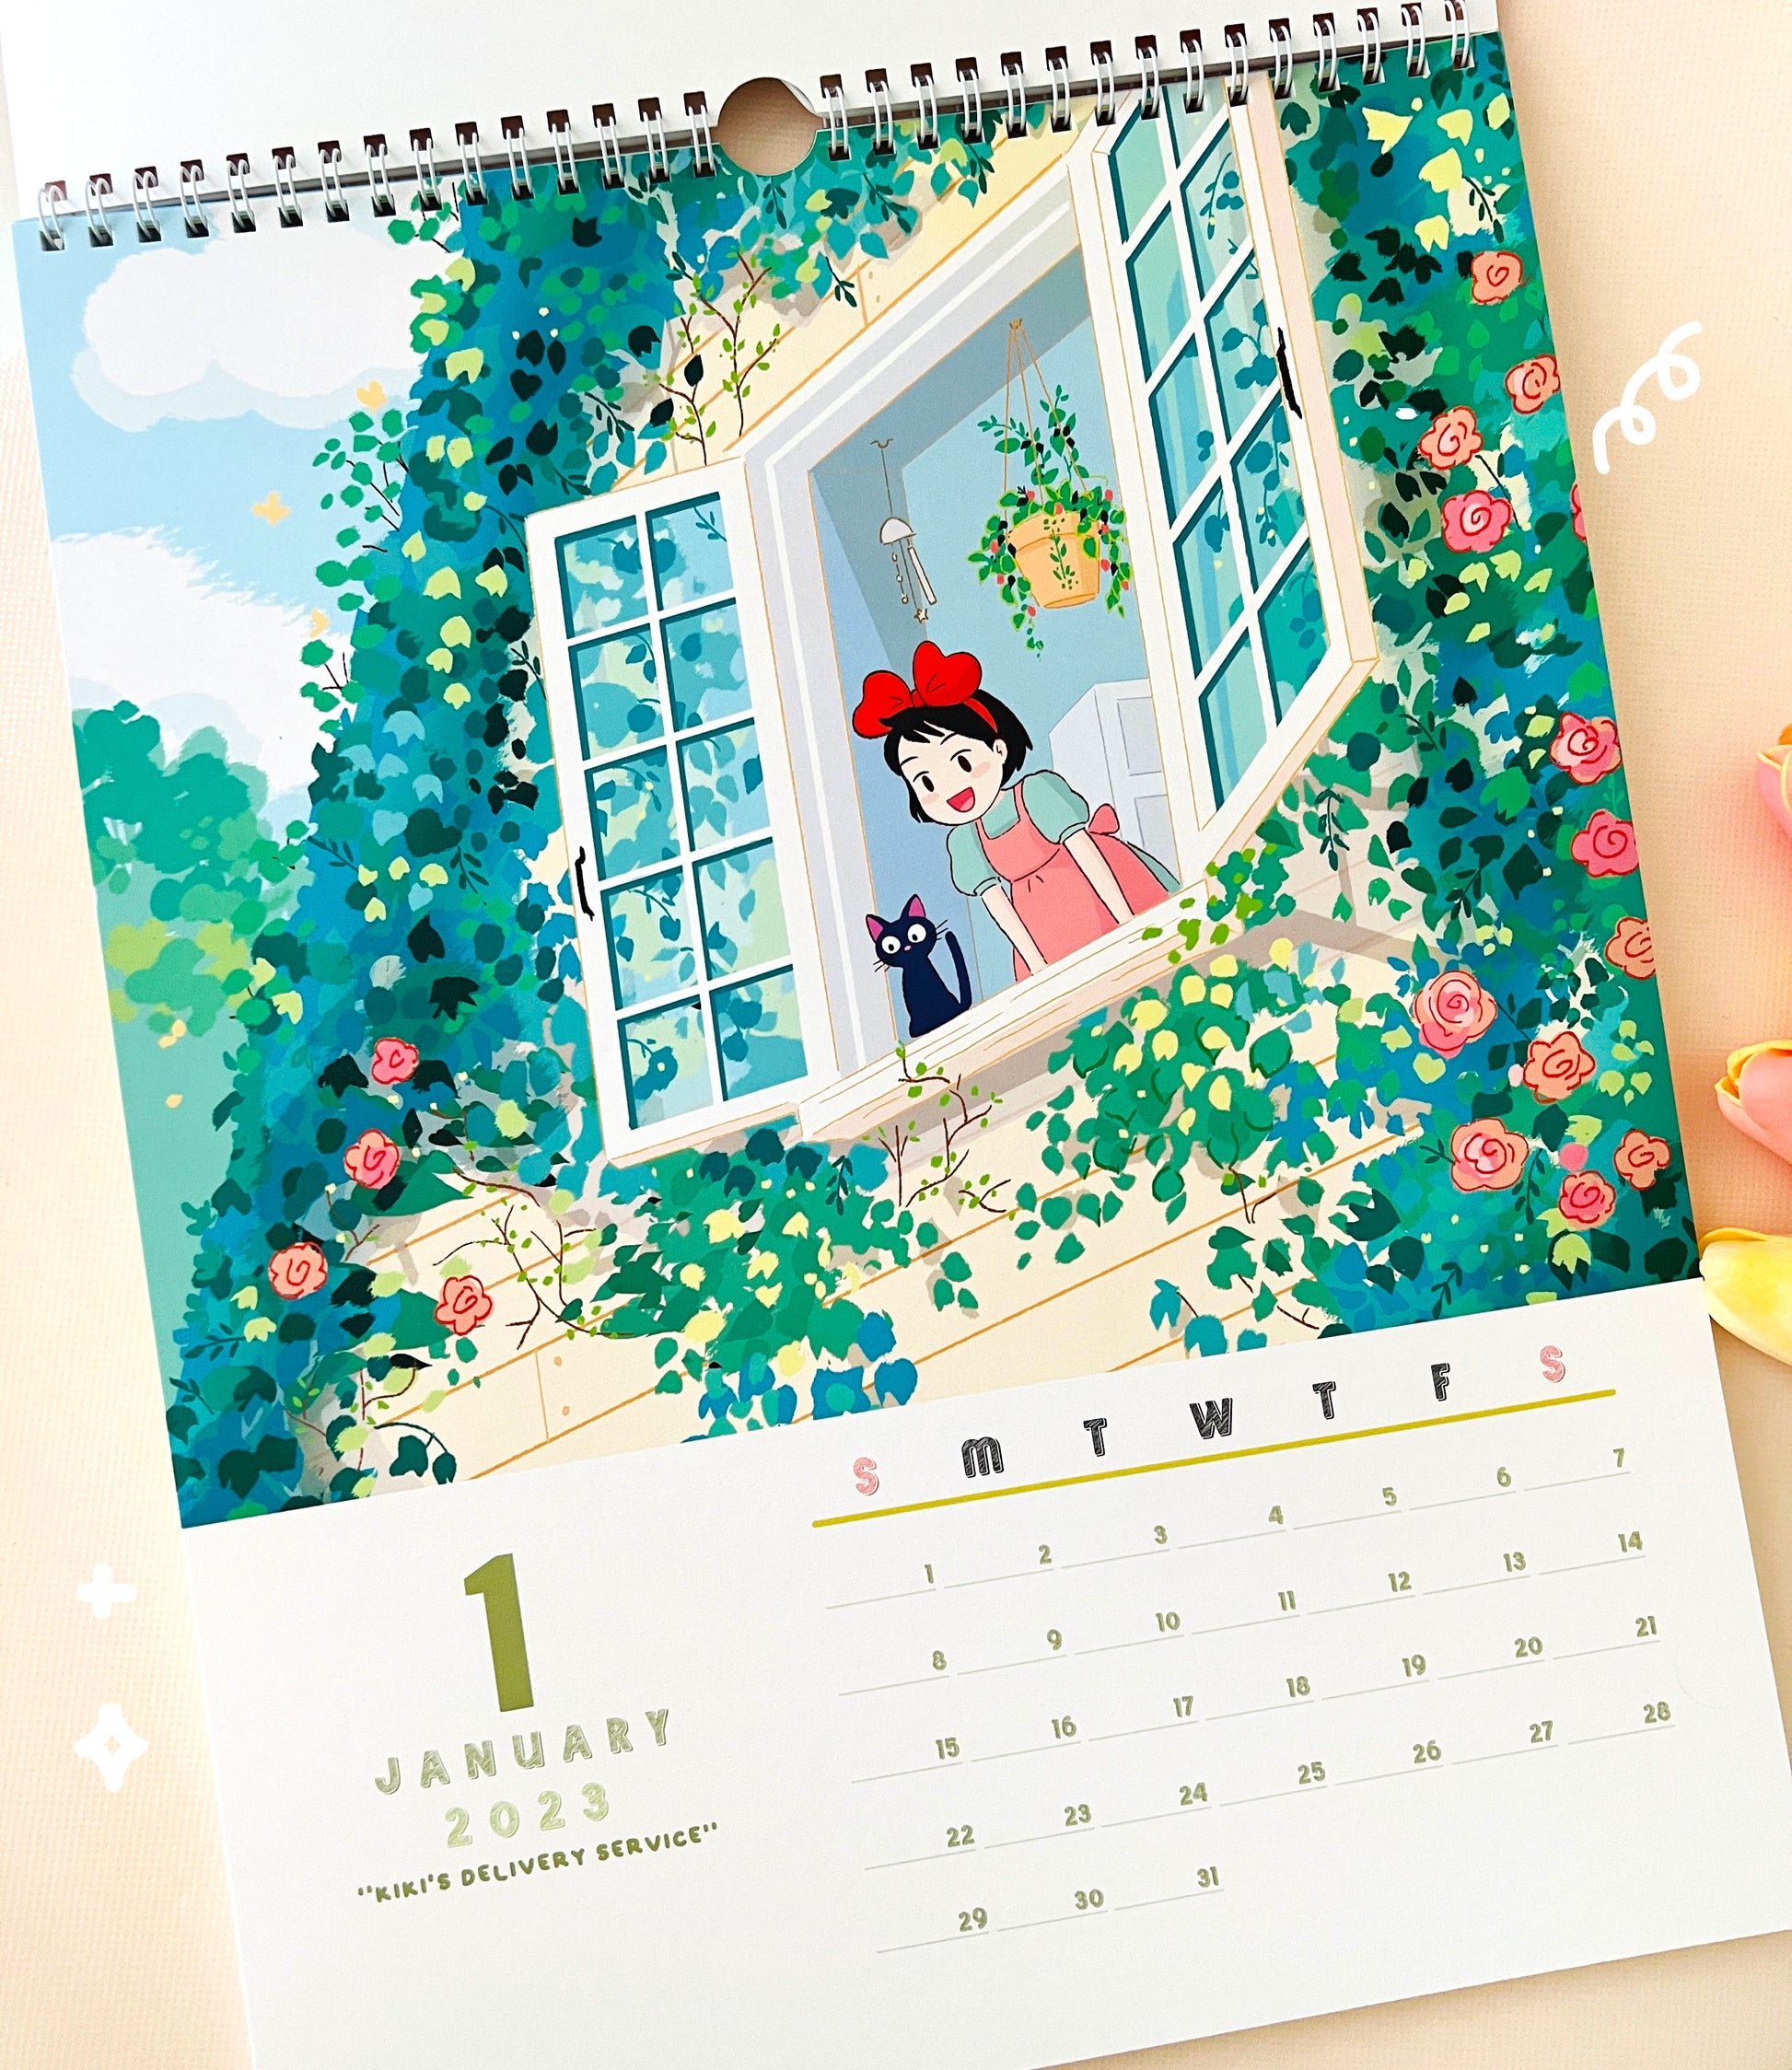 Stay Up to Date With These Cute Ghibli Themed Calendars